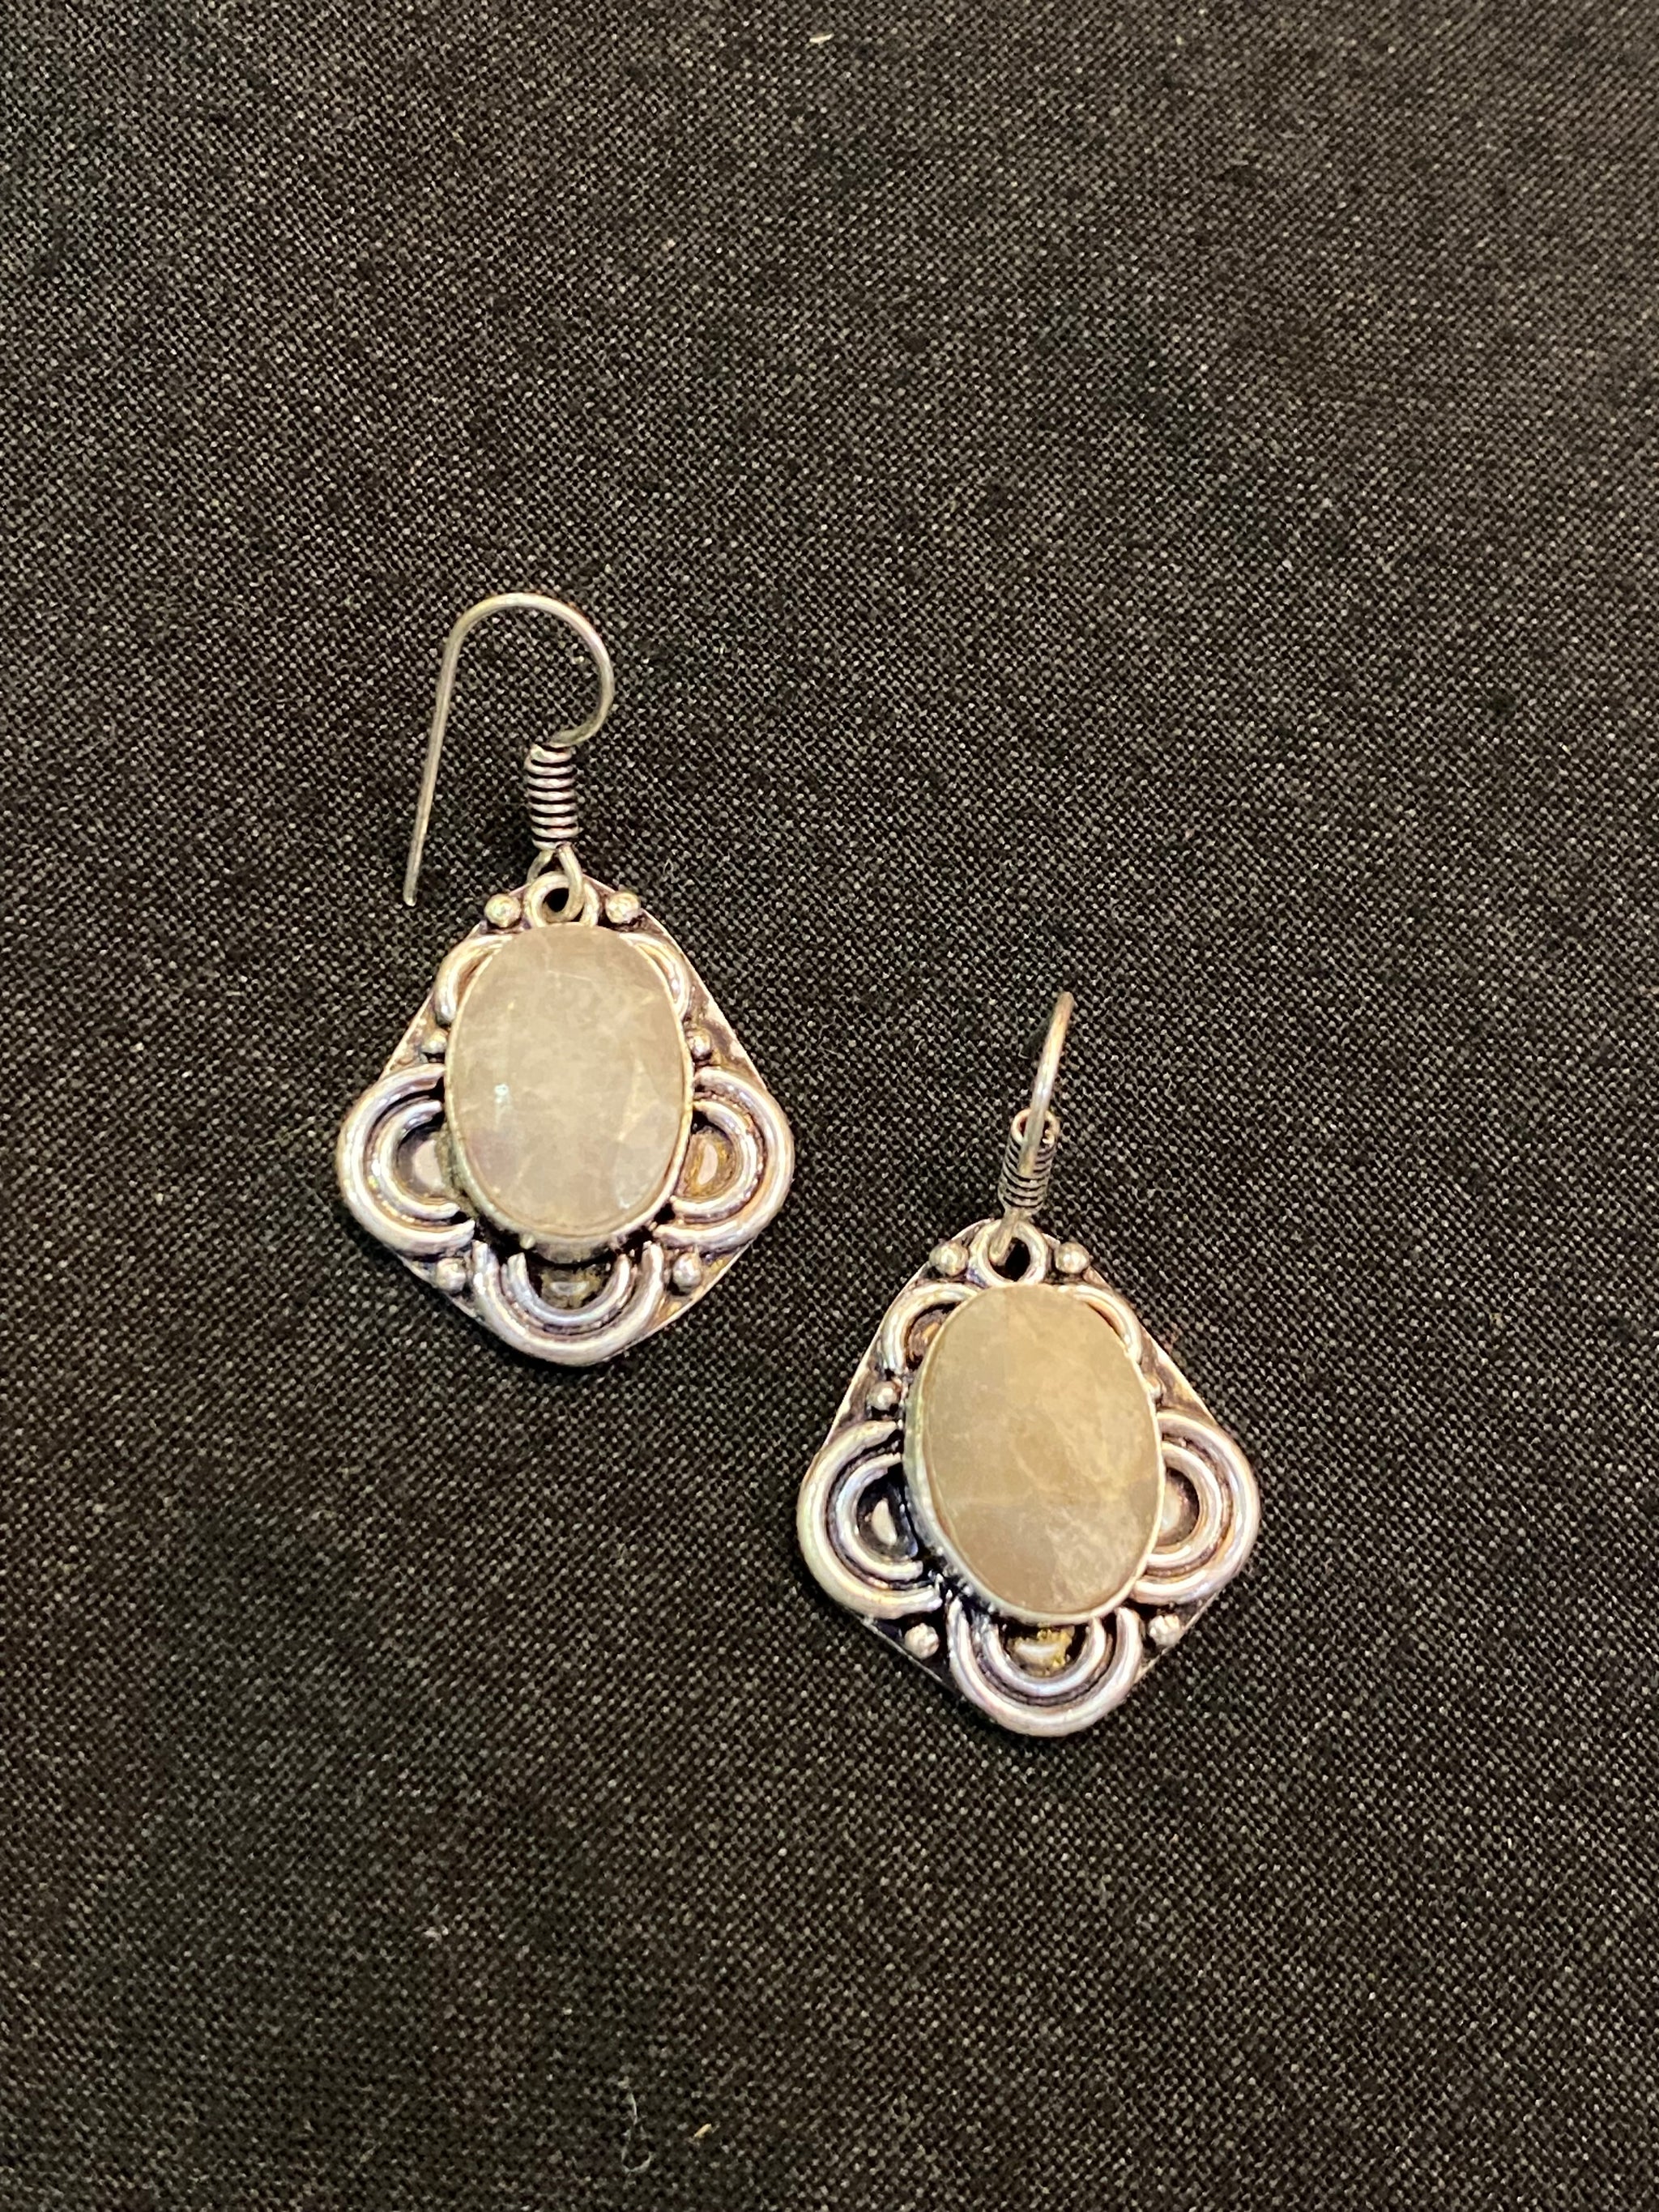 Silver Earrings with White Agate Stone